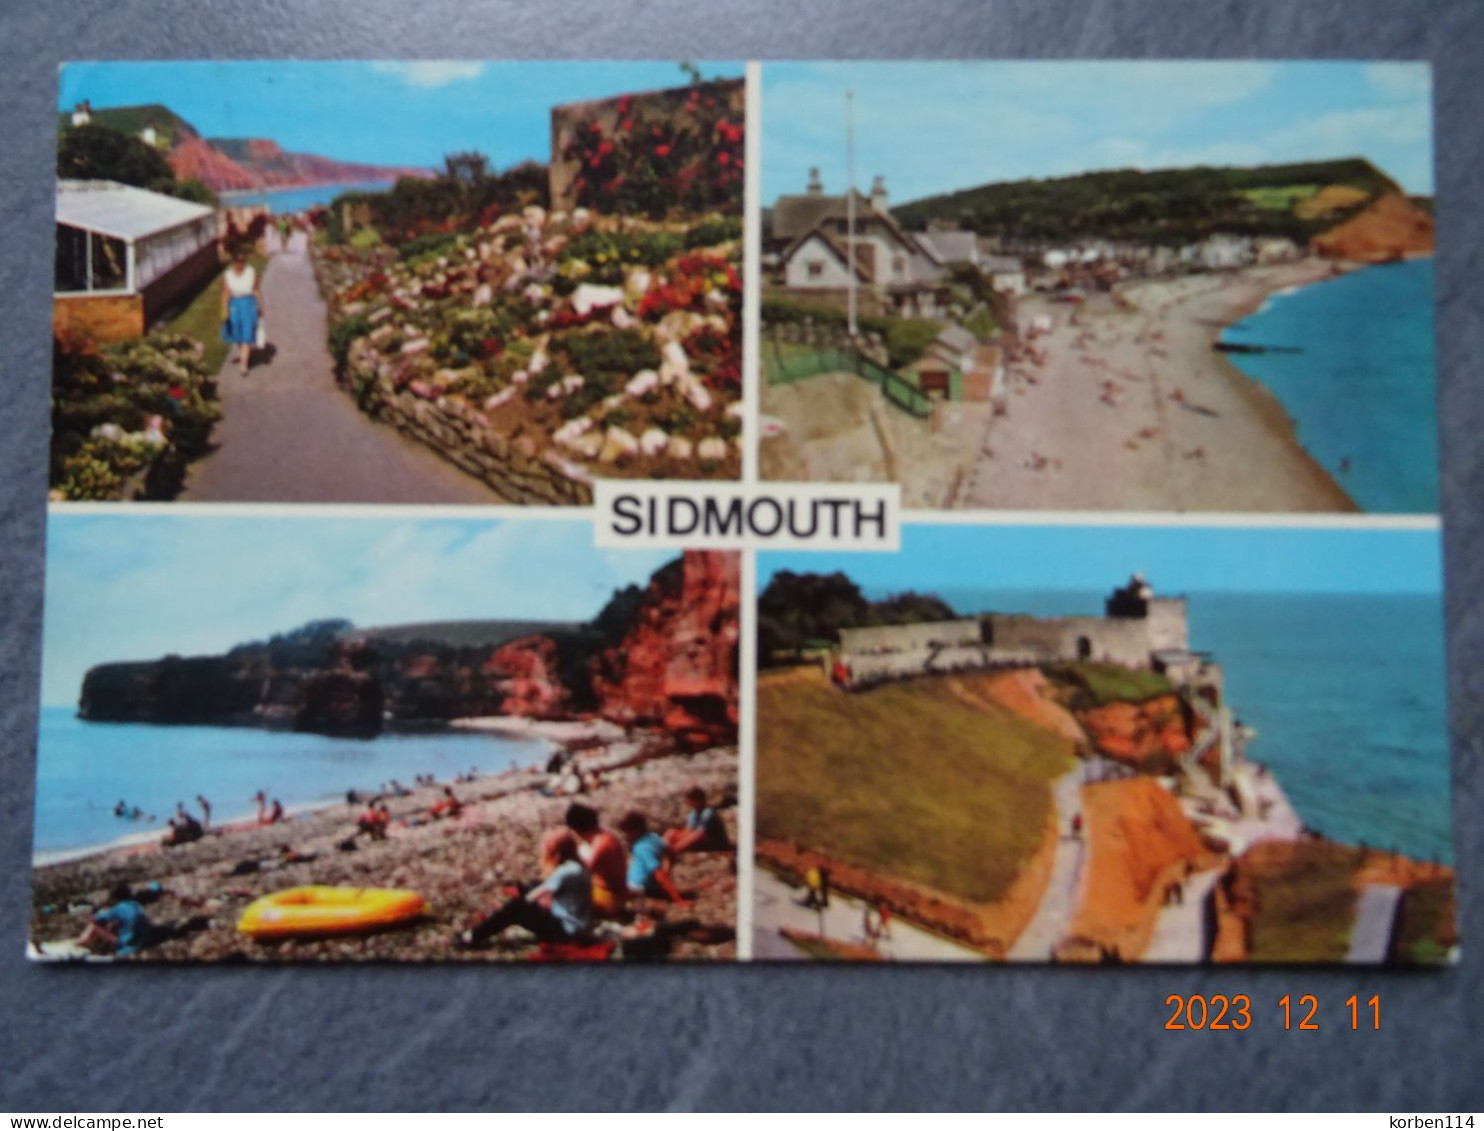 SIDMOUTH - Exeter